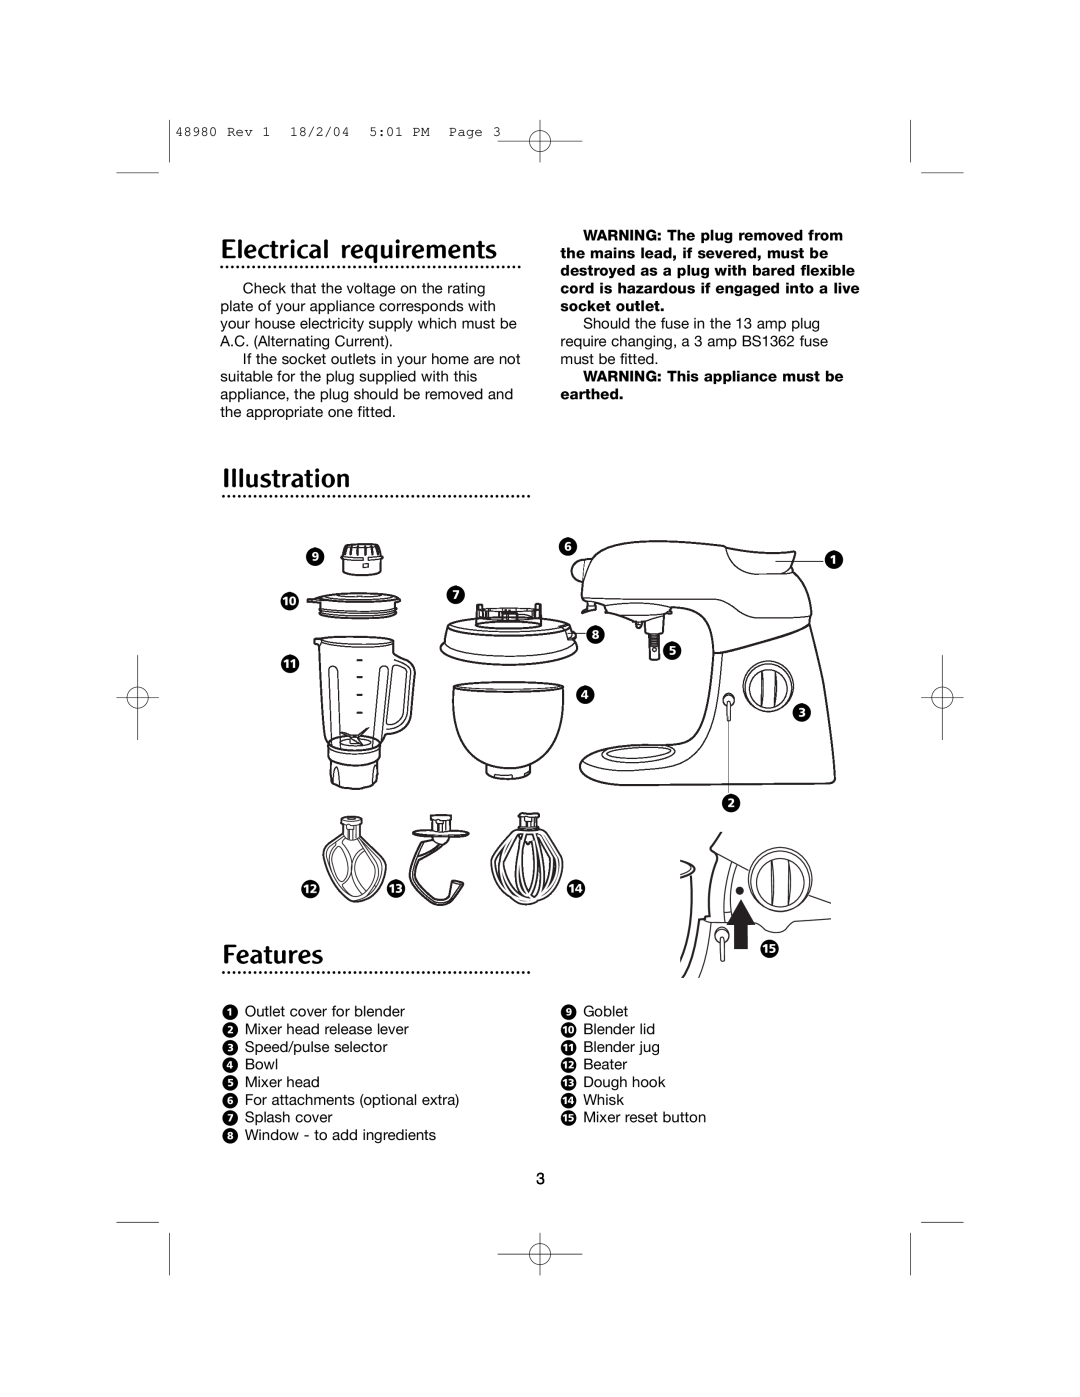 Morphy Richards Blender manual Electrical requirements, Illustration, Features 